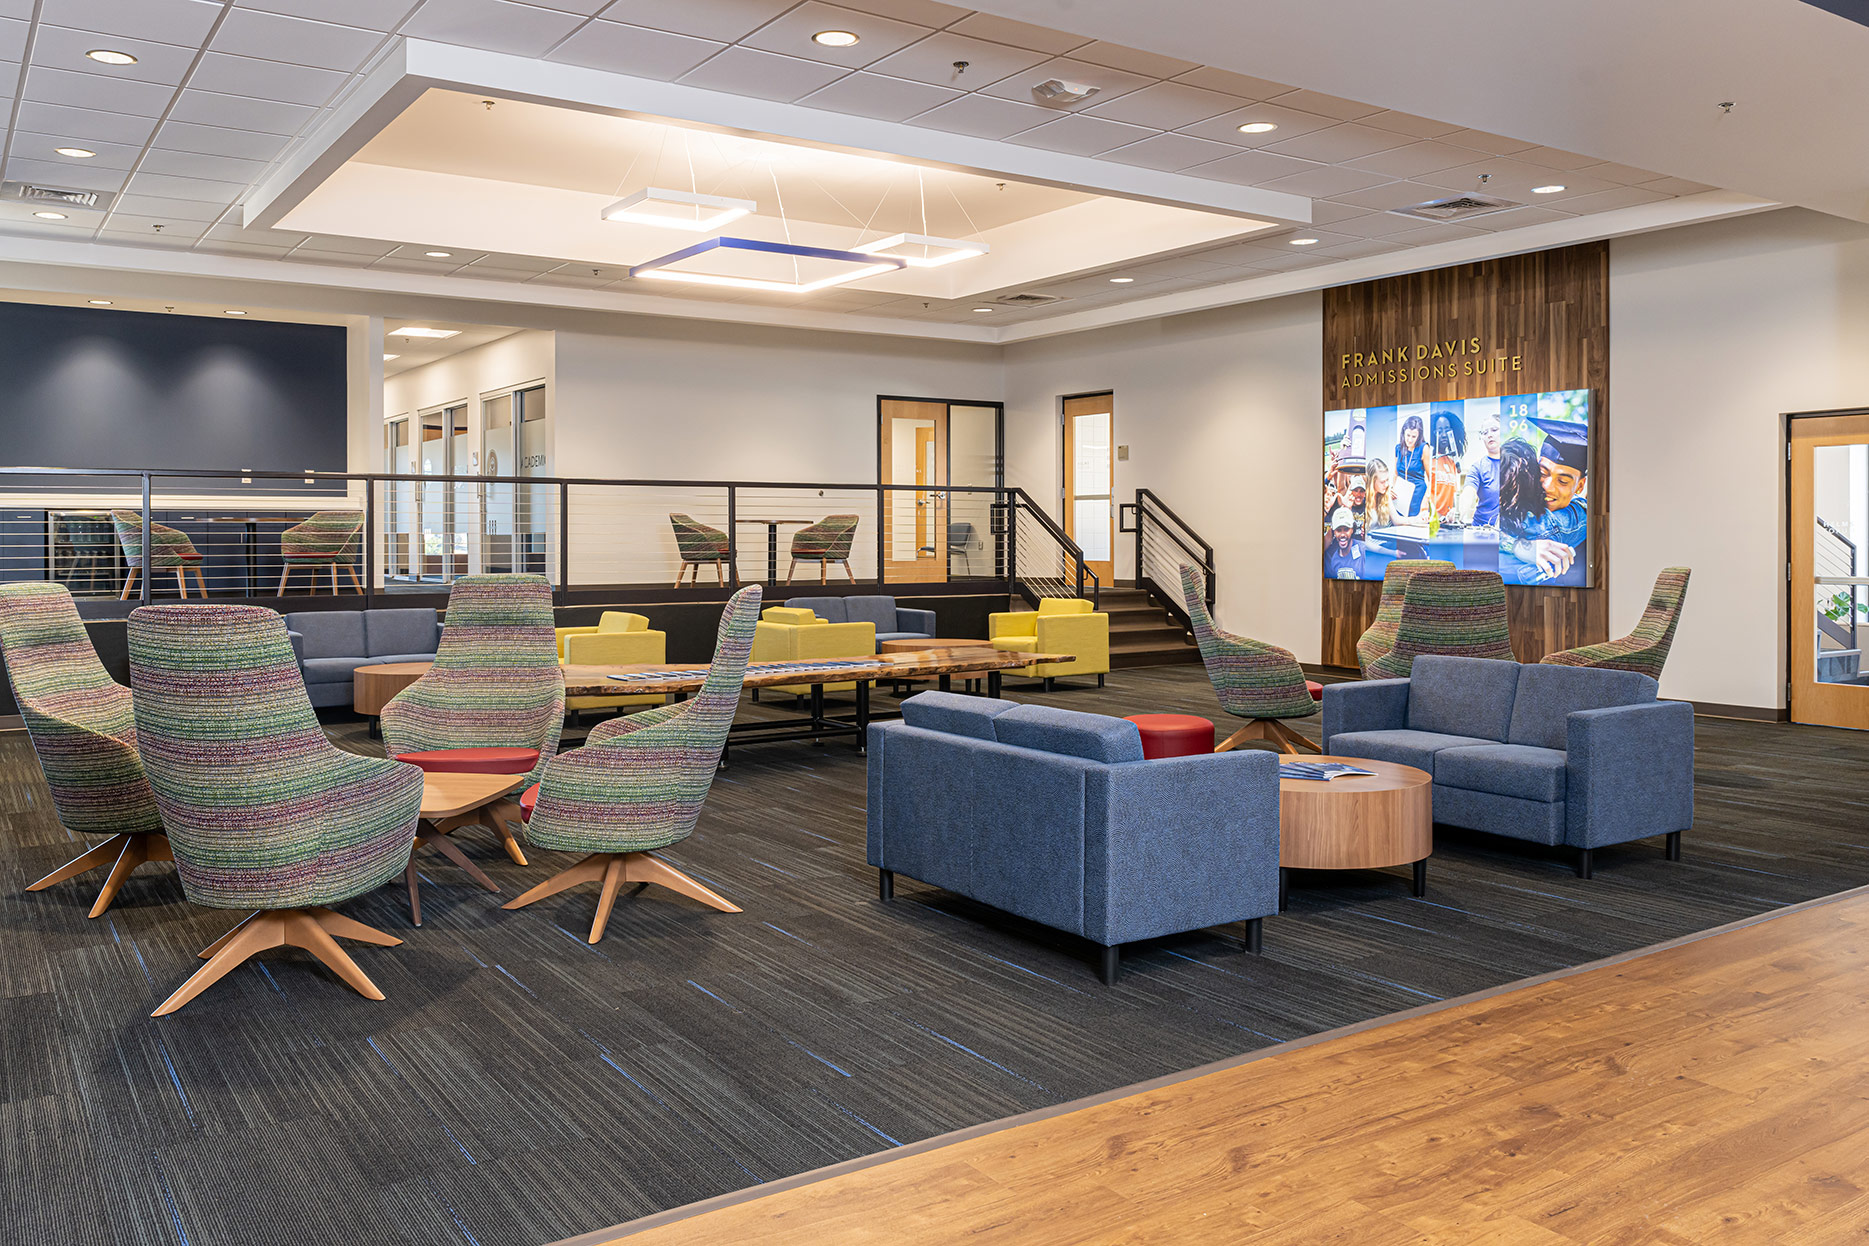 Commercial Interior Design for Wingate University Welcome Center - Student Seating